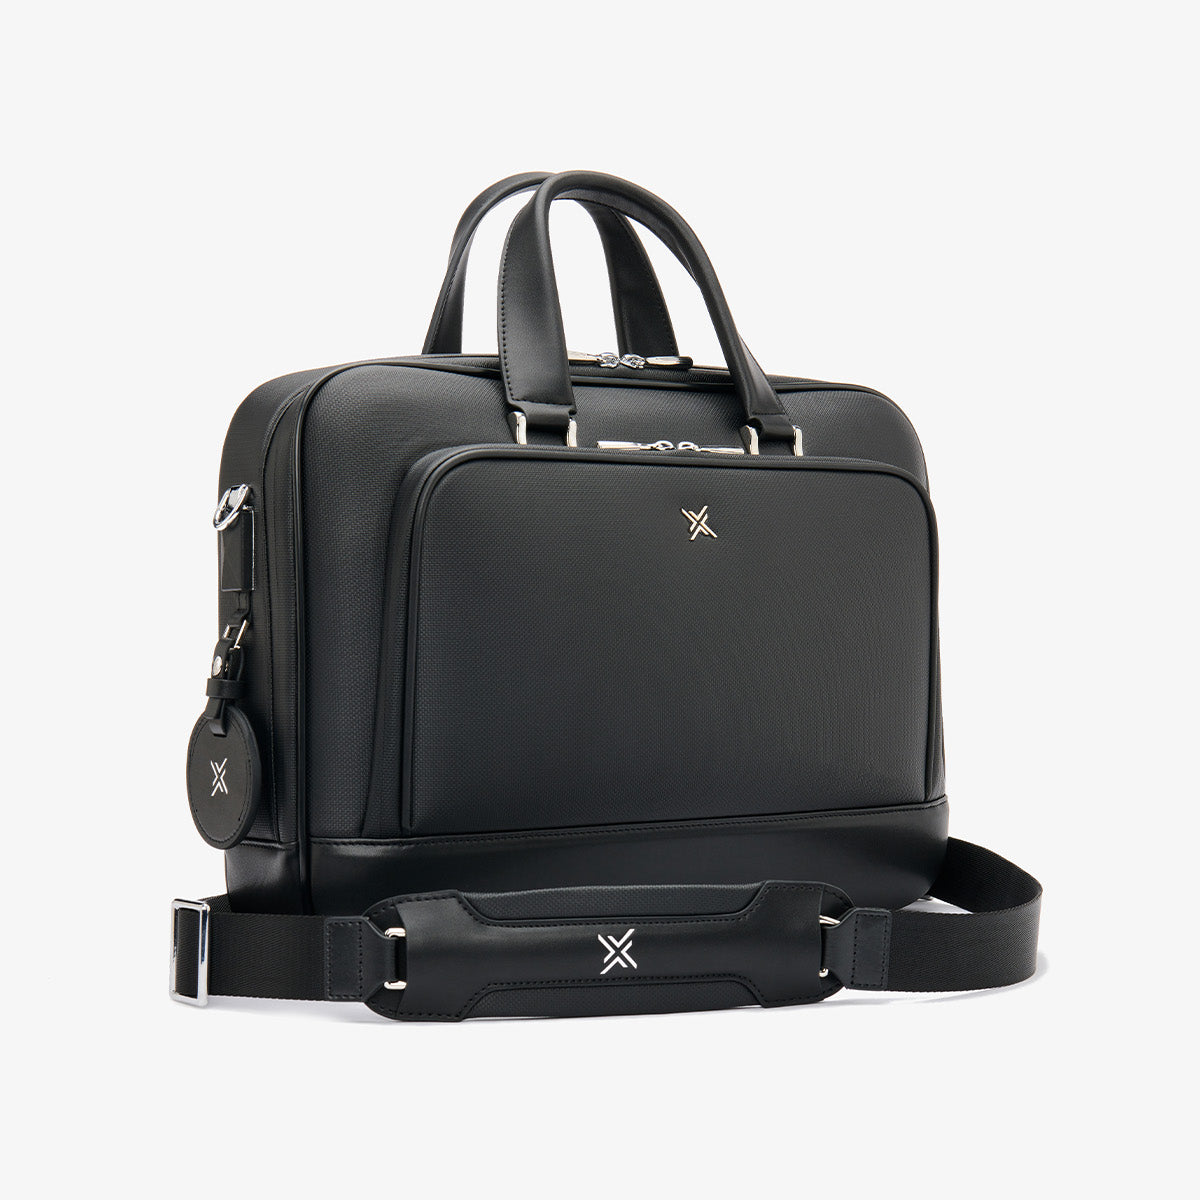 xBriefcase | The Ultimate Durable Briefcase for he Modern Man